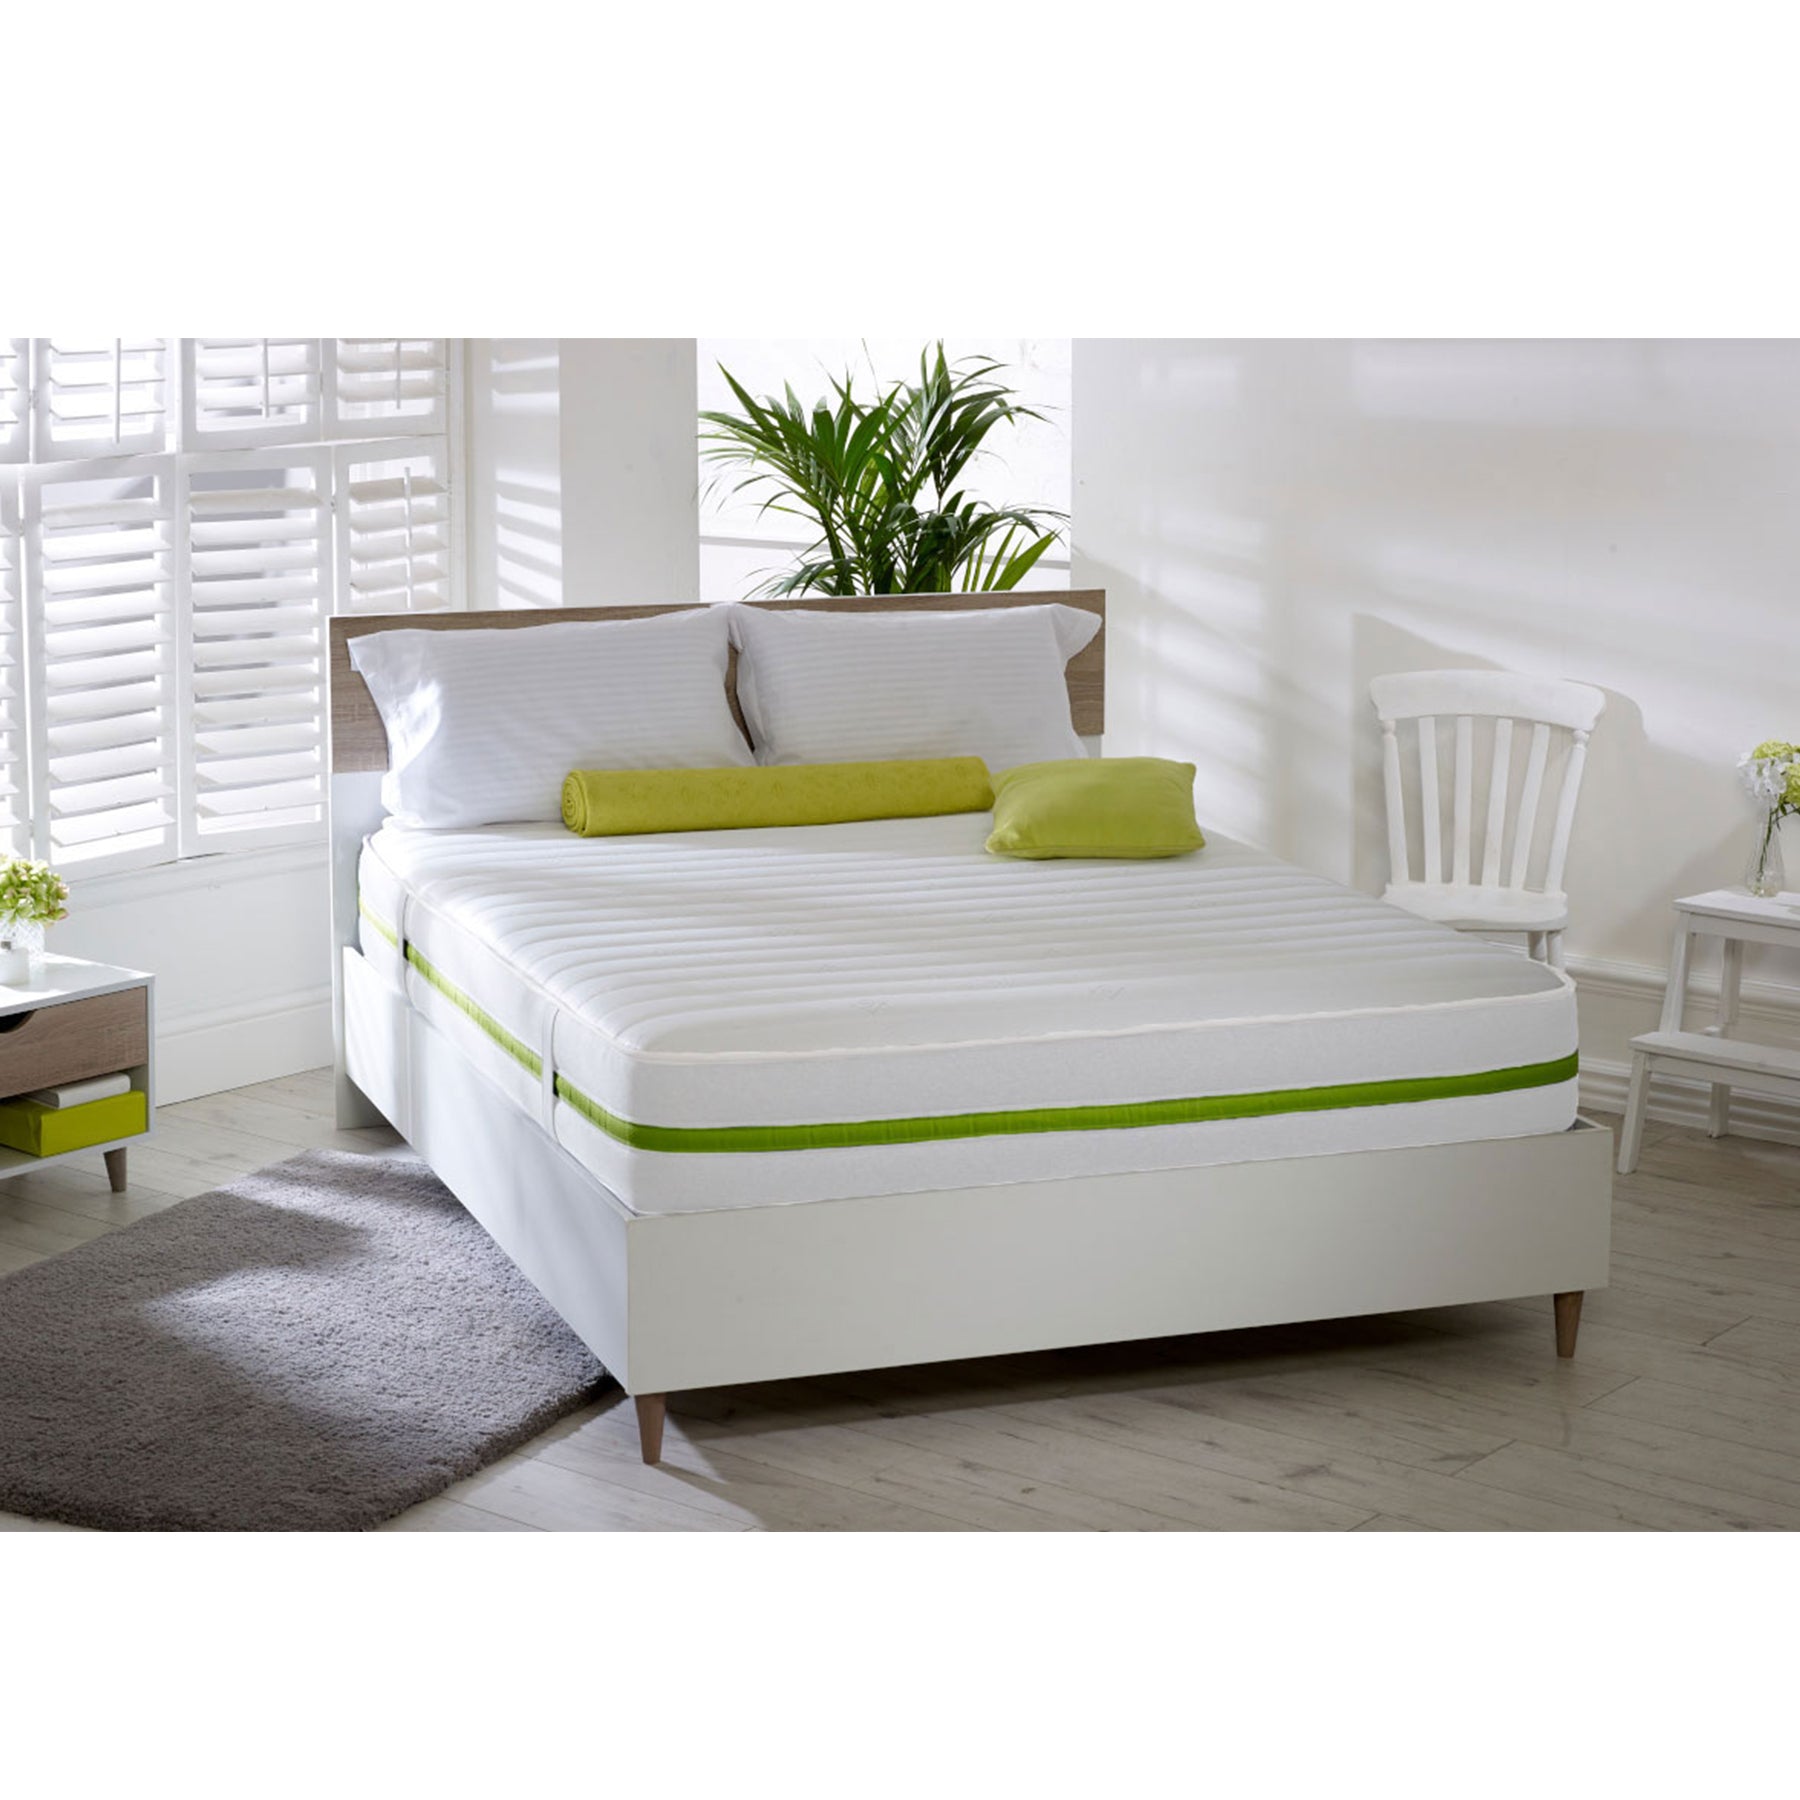 Starlight Beds 20cm Deep White and Green Border Quilted Memory foam and Open Coil Spring Mattress